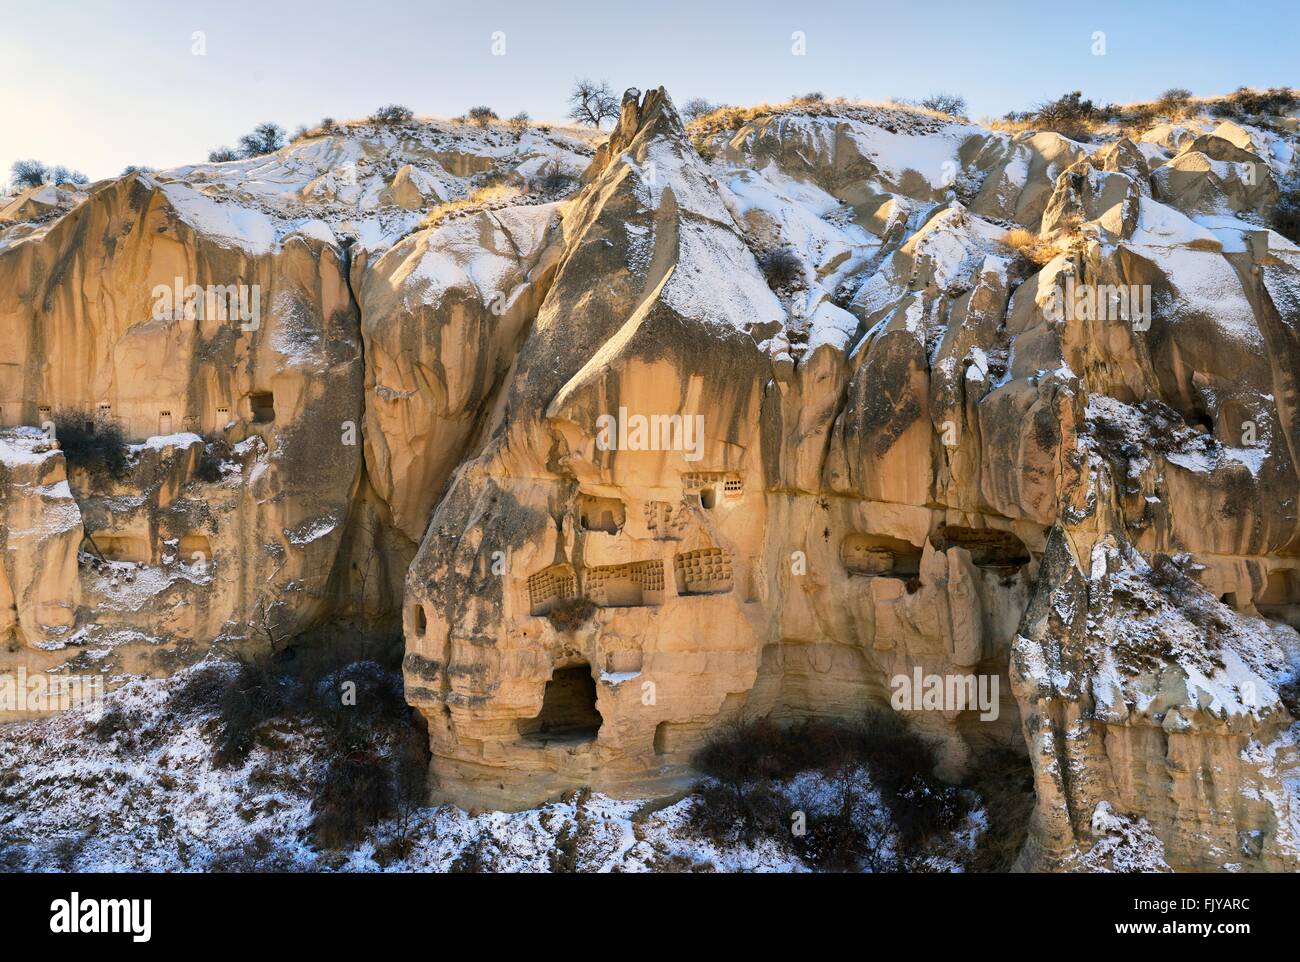 Eroded volcanic tuff early Christian troglodyte cave dwelling rooms in Goreme Open Air Museum National Park, Cappadocia, Turkey Stock Photo